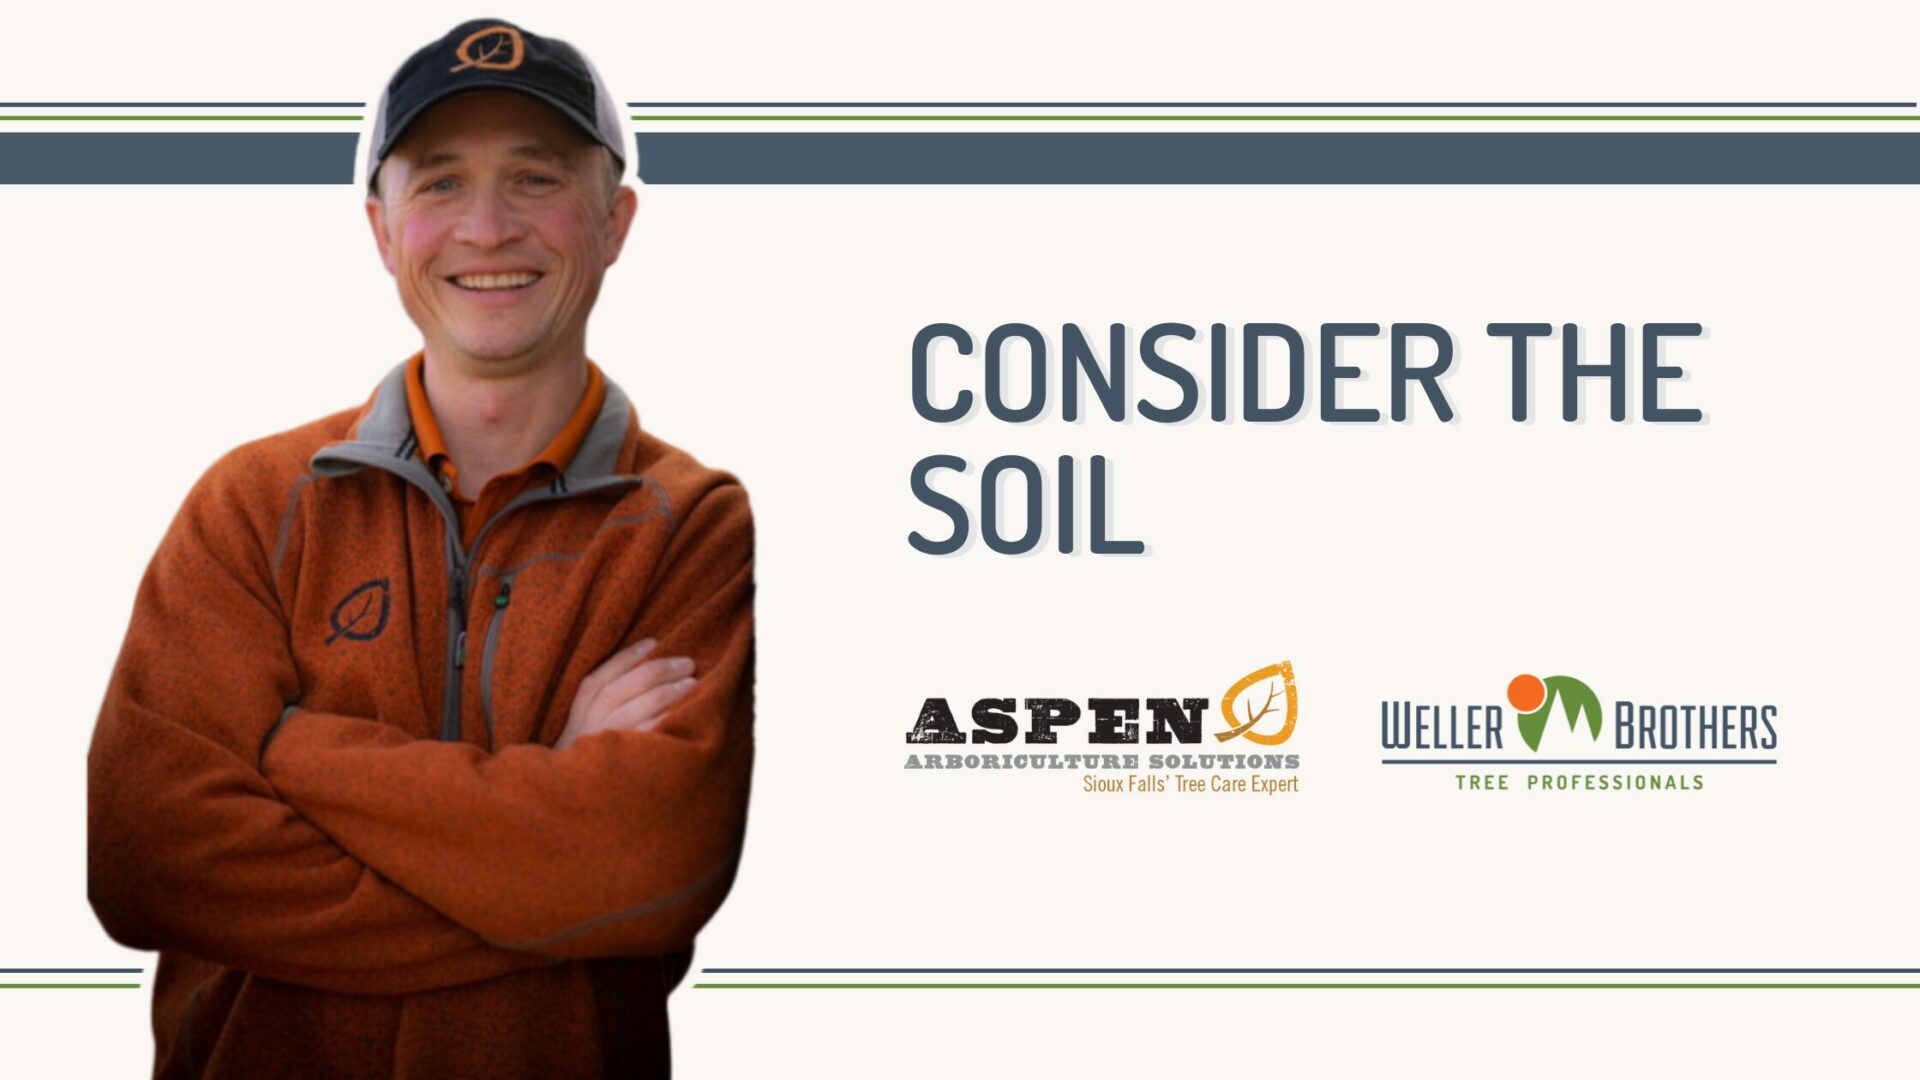 Tree Talk with Sam - Consider the Soil